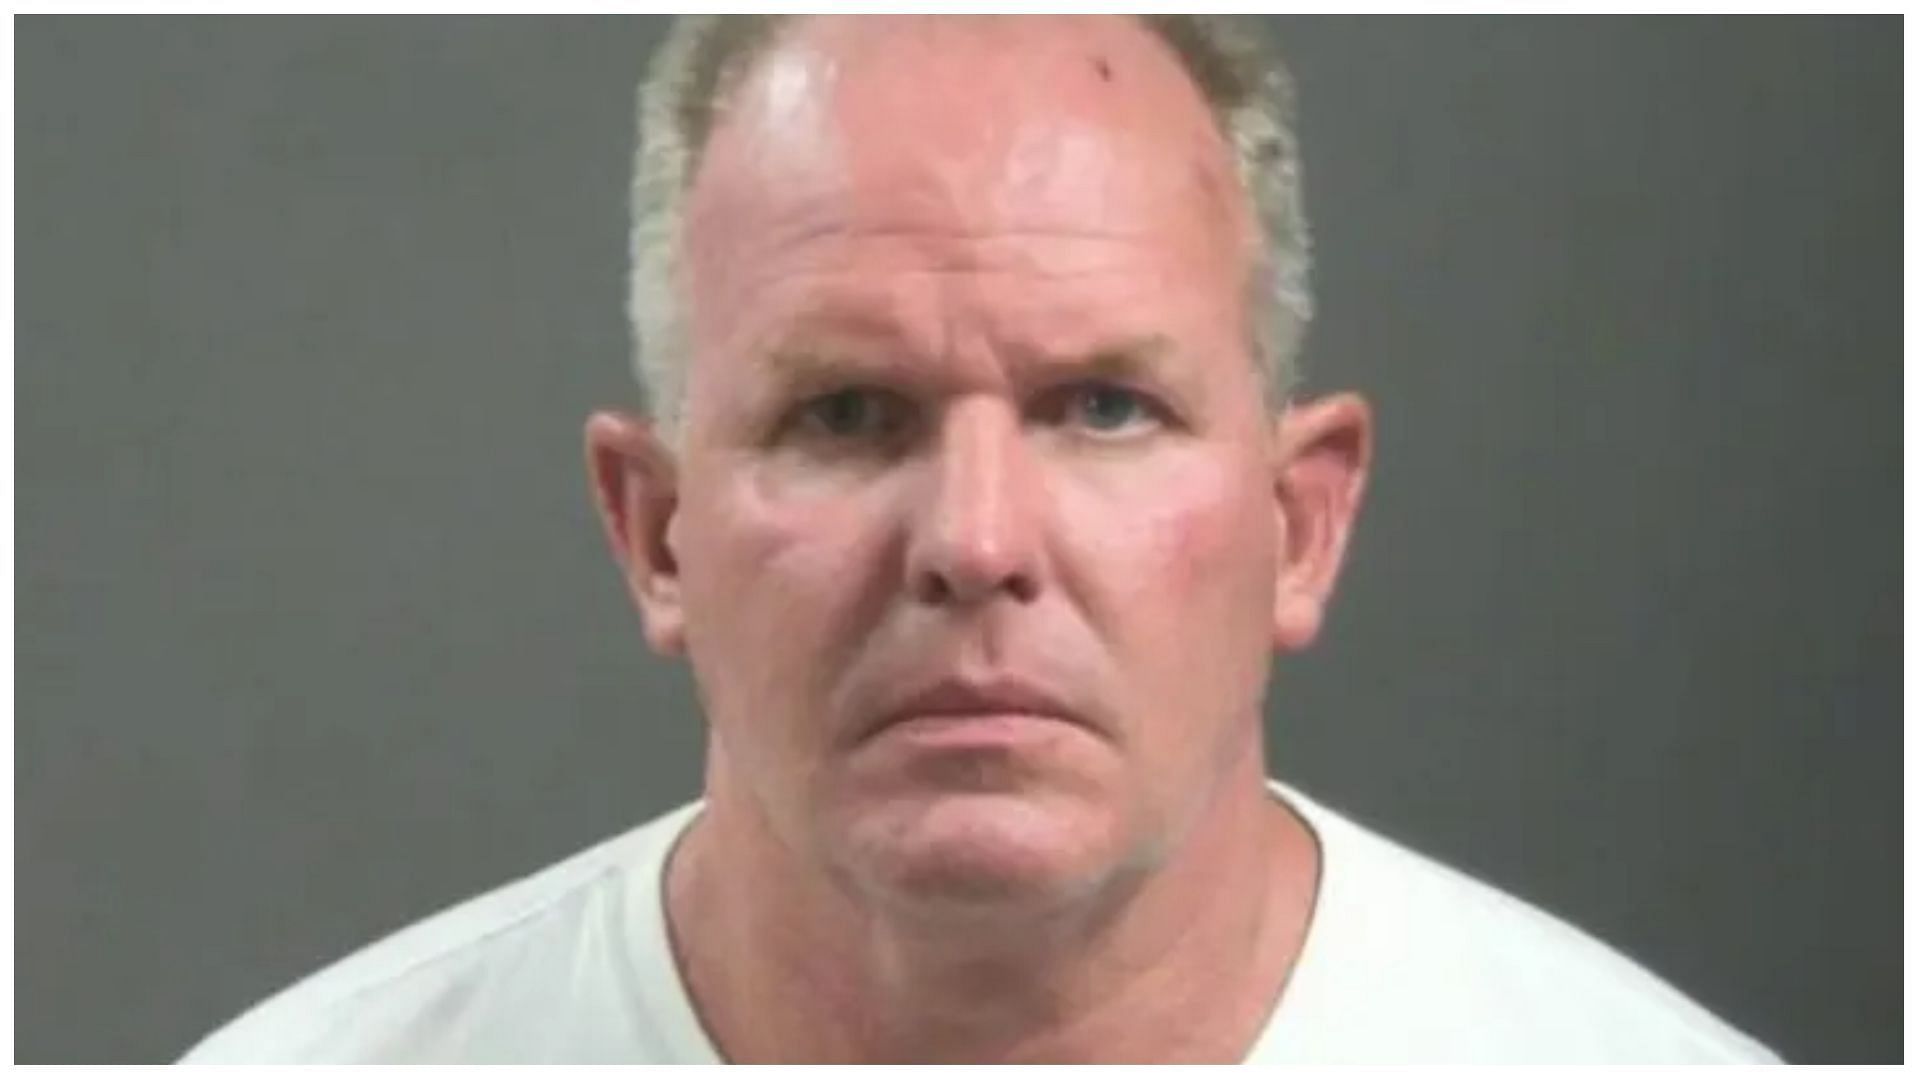  Doug Ramsey has been in the food industry for over 3 decades (image via Washington County Jail)